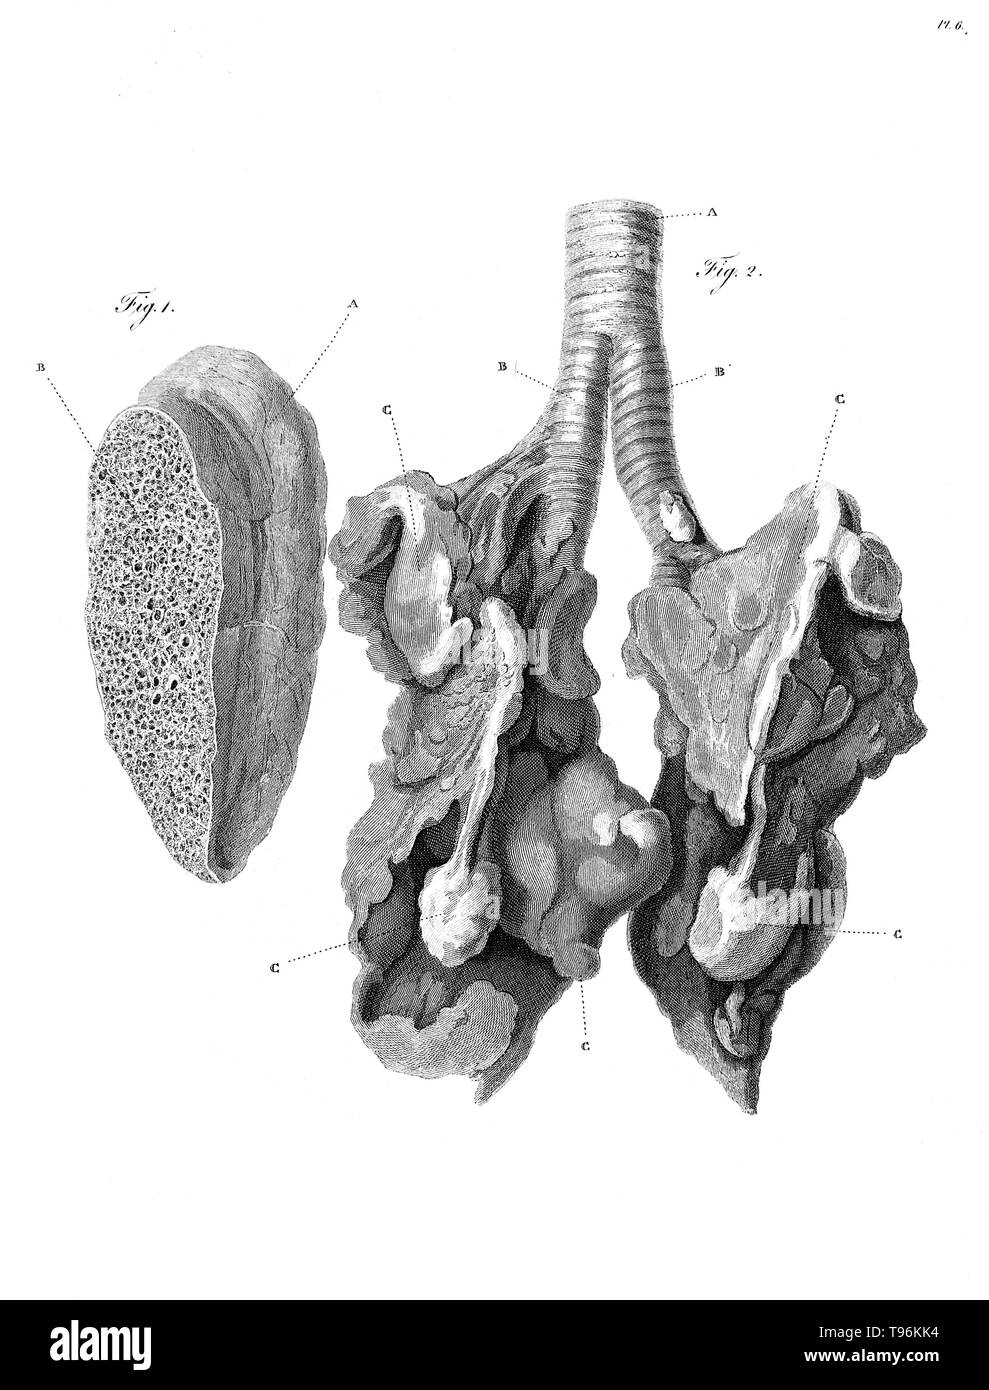 Section of lung of Samuel Johnson. Postmortem examination showed that Johnson had suffered from emphysema of the lungs. Samuel Johnson (September 18, 1709 - December 13, 1784), often referred to as Dr. Johnson, was an English author who made lasting contributions to English literature as a poet, essayist, moralist, literary critic, biographer, editor and lexicographer. Johnson was a devout Anglican and committed Tory. He is the subject of James Boswell's Life of Samuel Johnson. Stock Photo